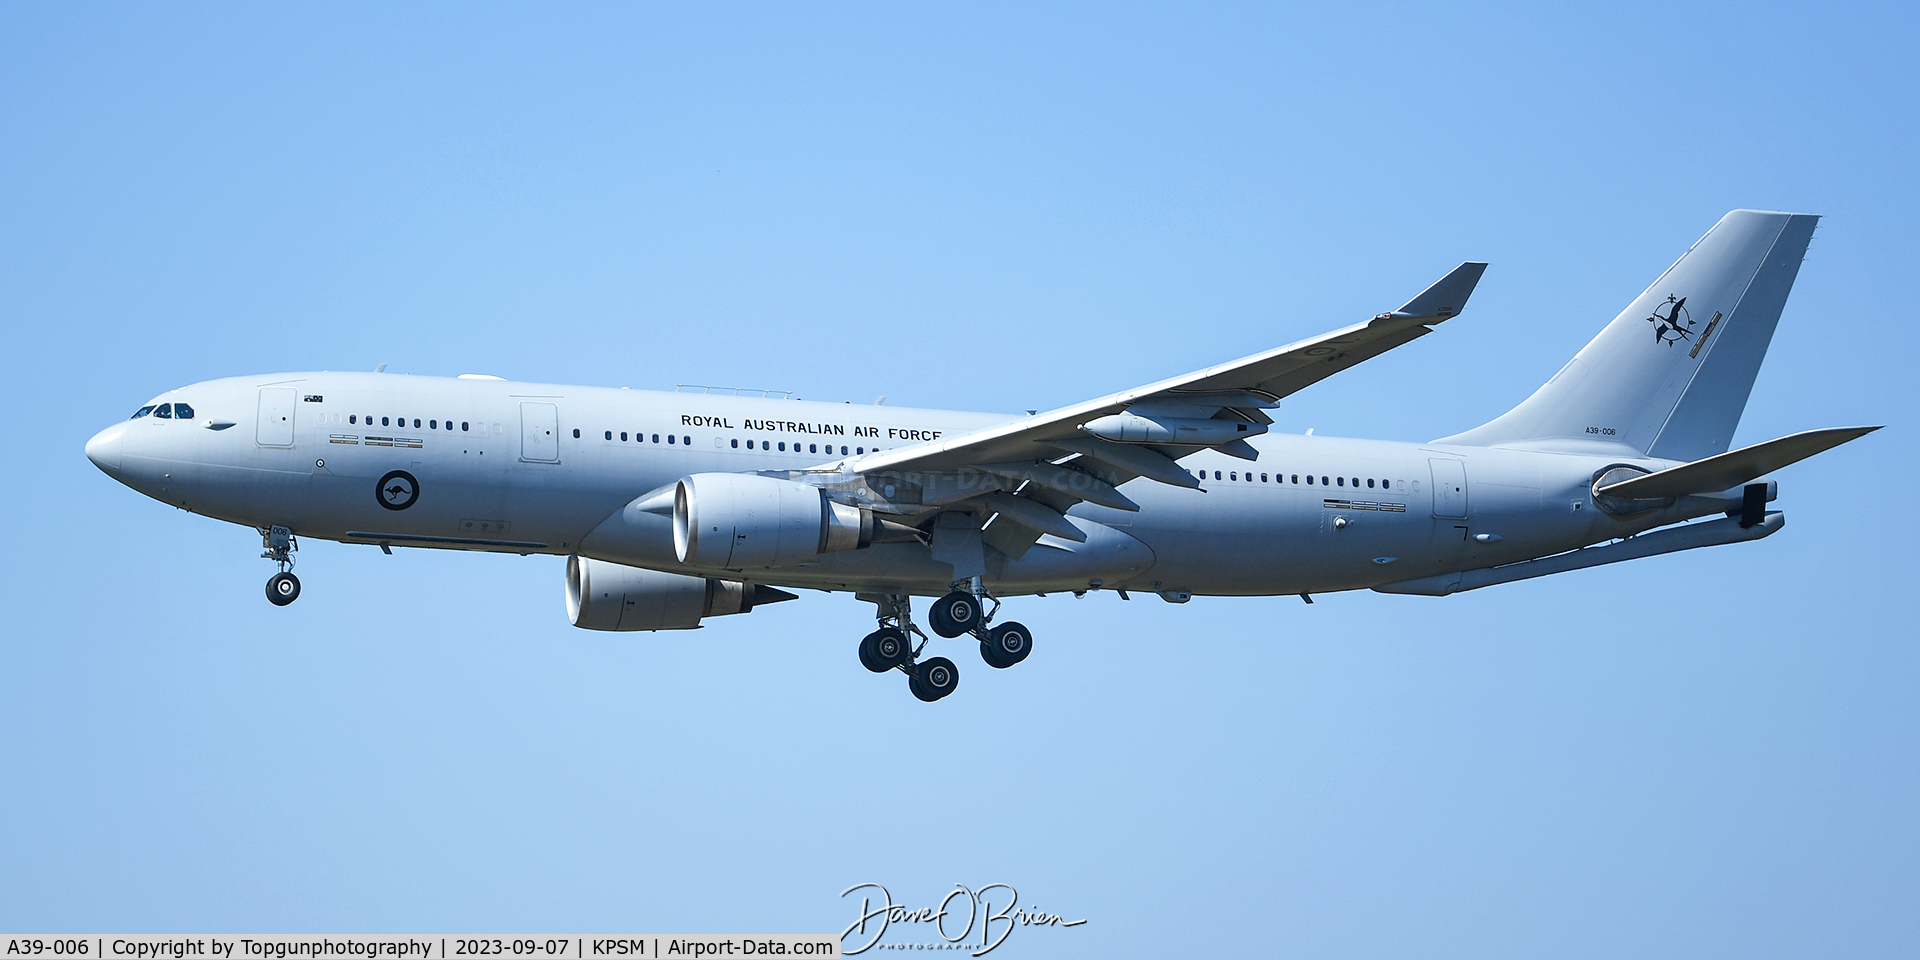 A39-006, 2008 Airbus A330-203/MRTT C/N 892, AUSSIE540 dropping in for static display